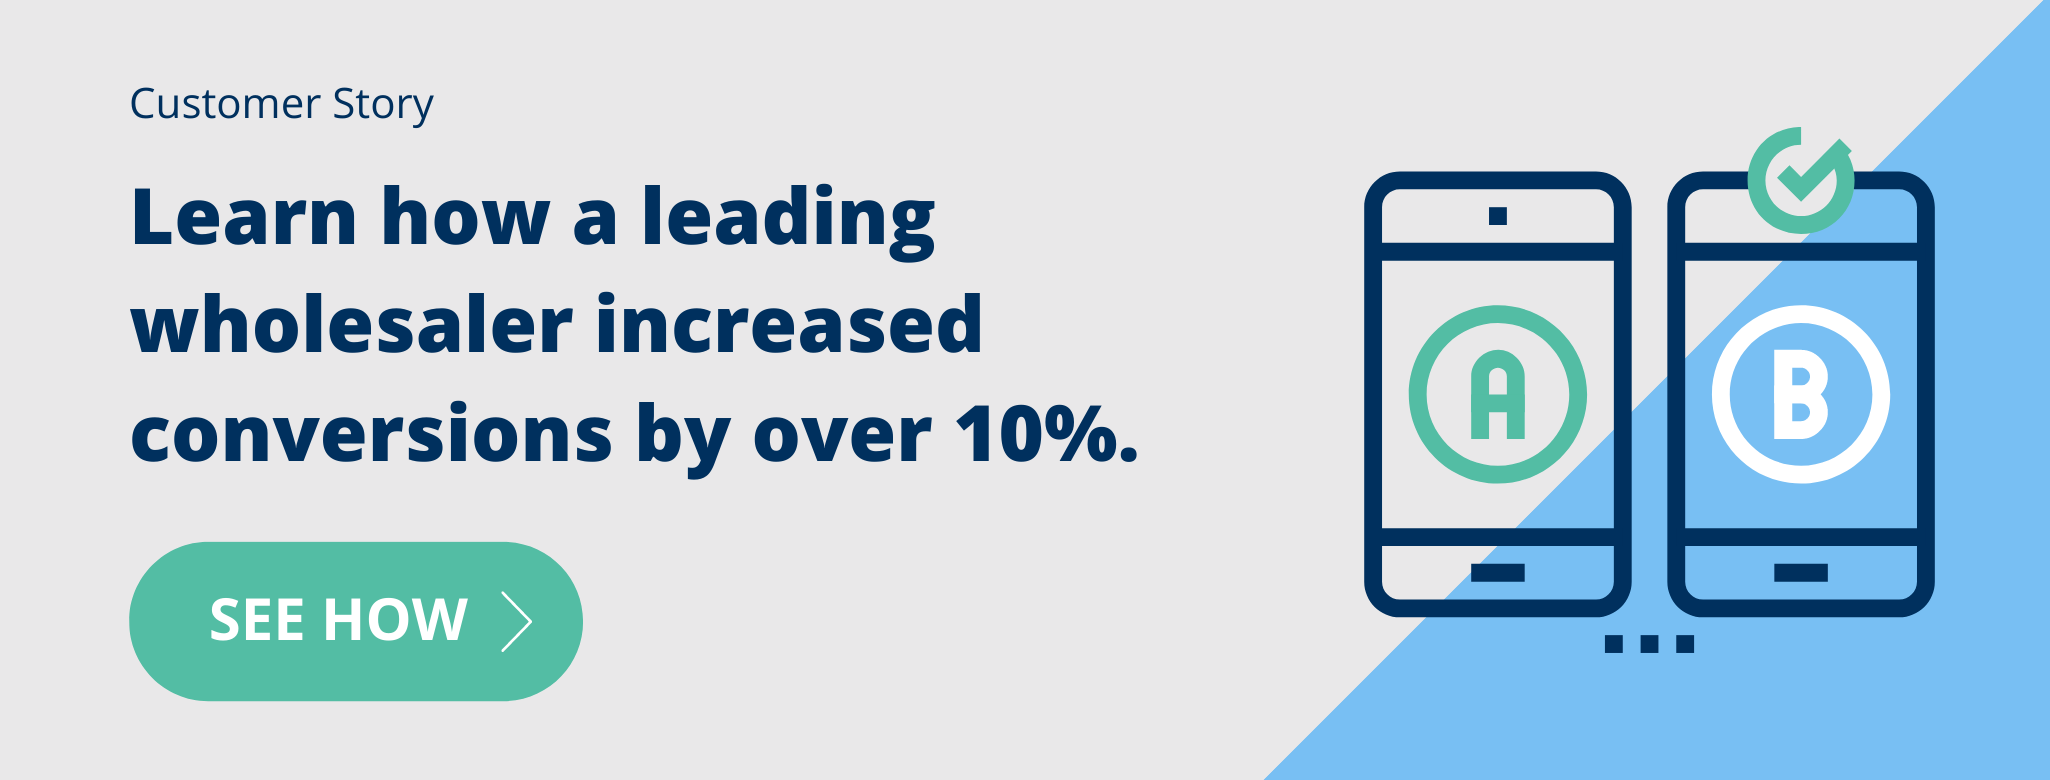 See how a leading wholesaler increased conversions by over 10%.